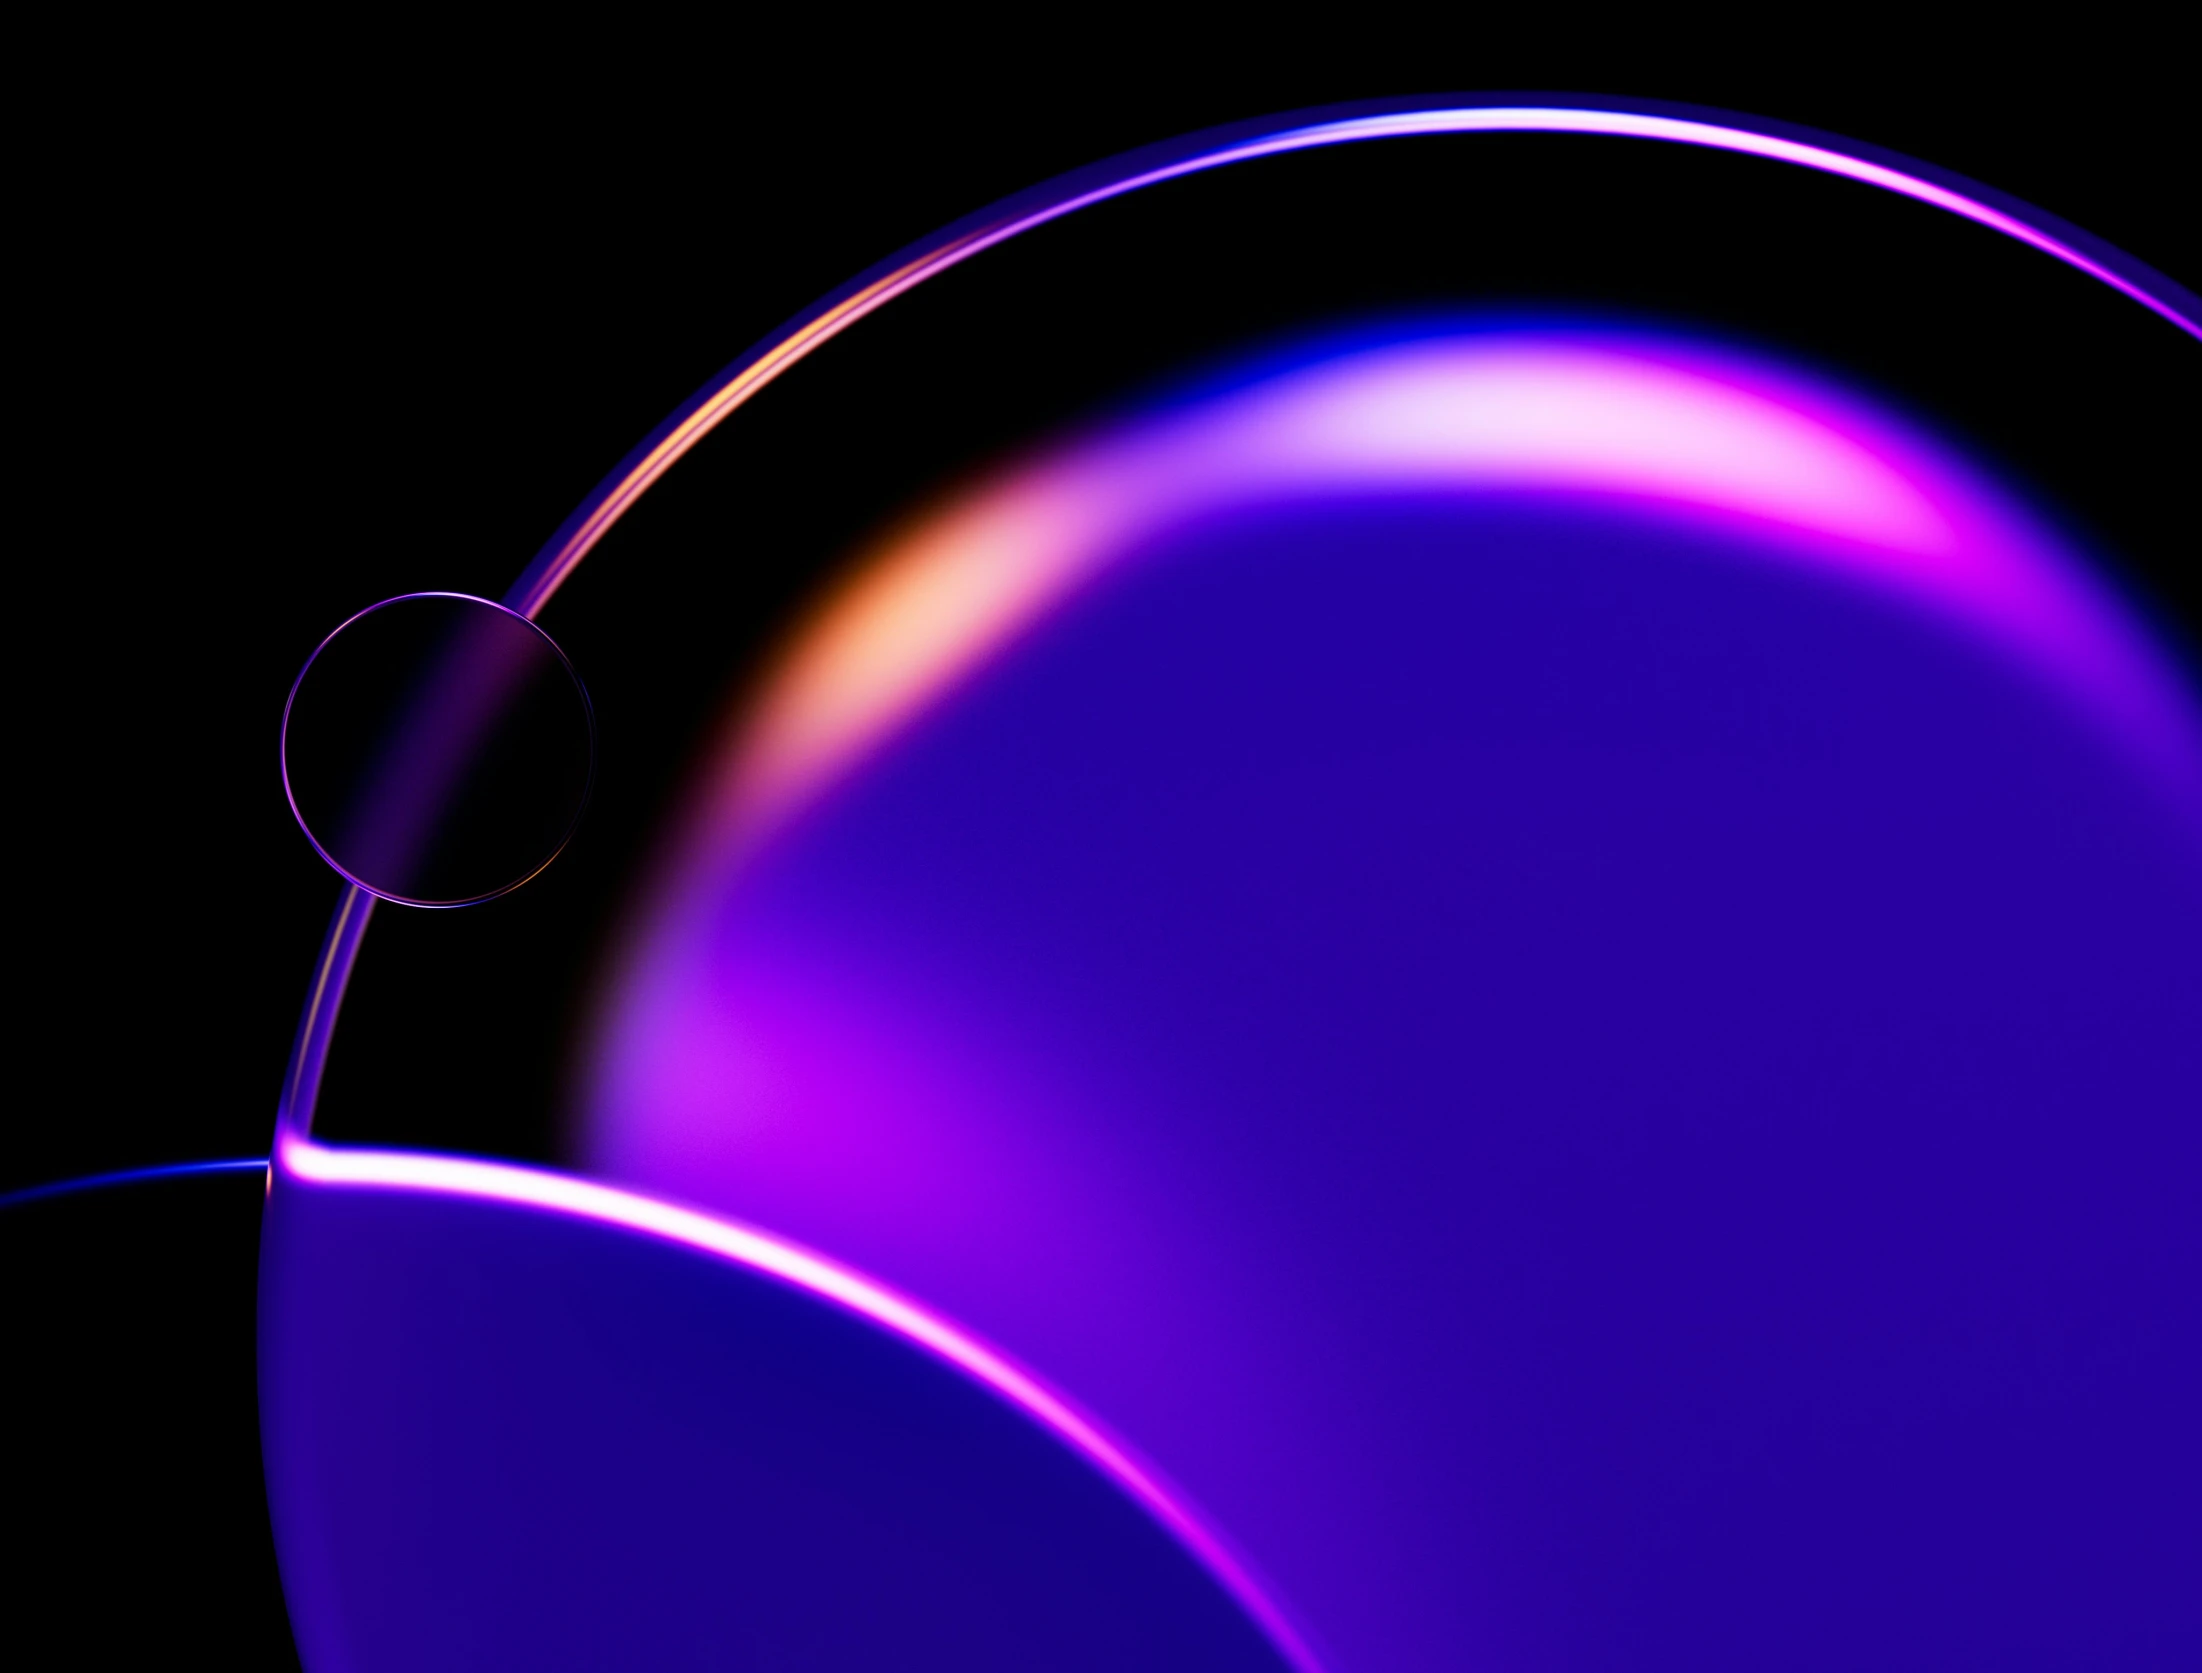 a round object is purple and has a small circular object